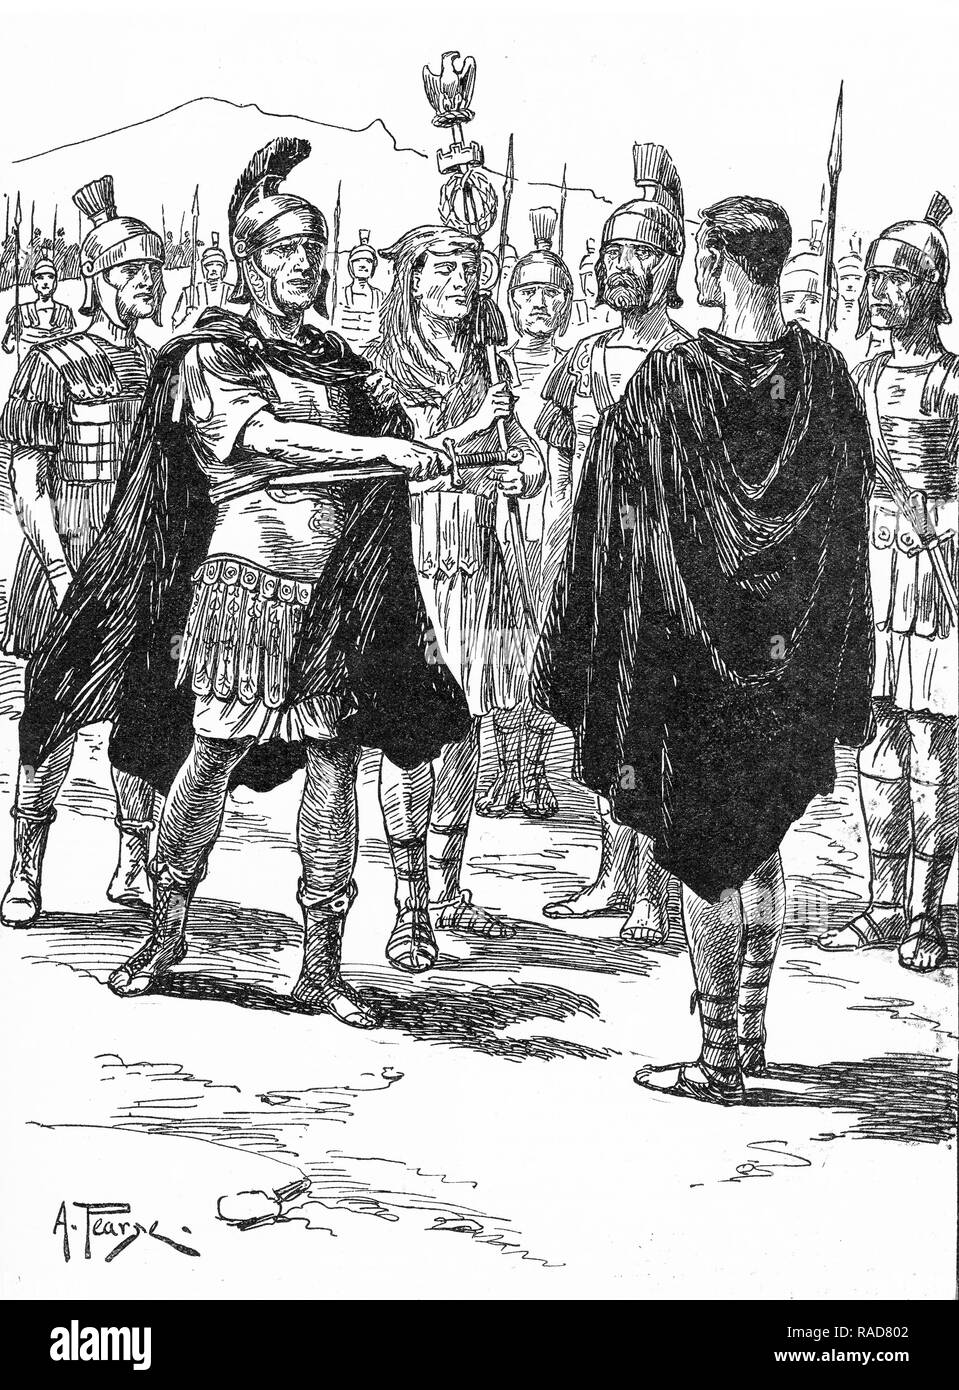 Engraving of a Roman officer handing a sword to another soldier on parade. From an original engraving in the Boys Own Annual 1925. Stock Photo